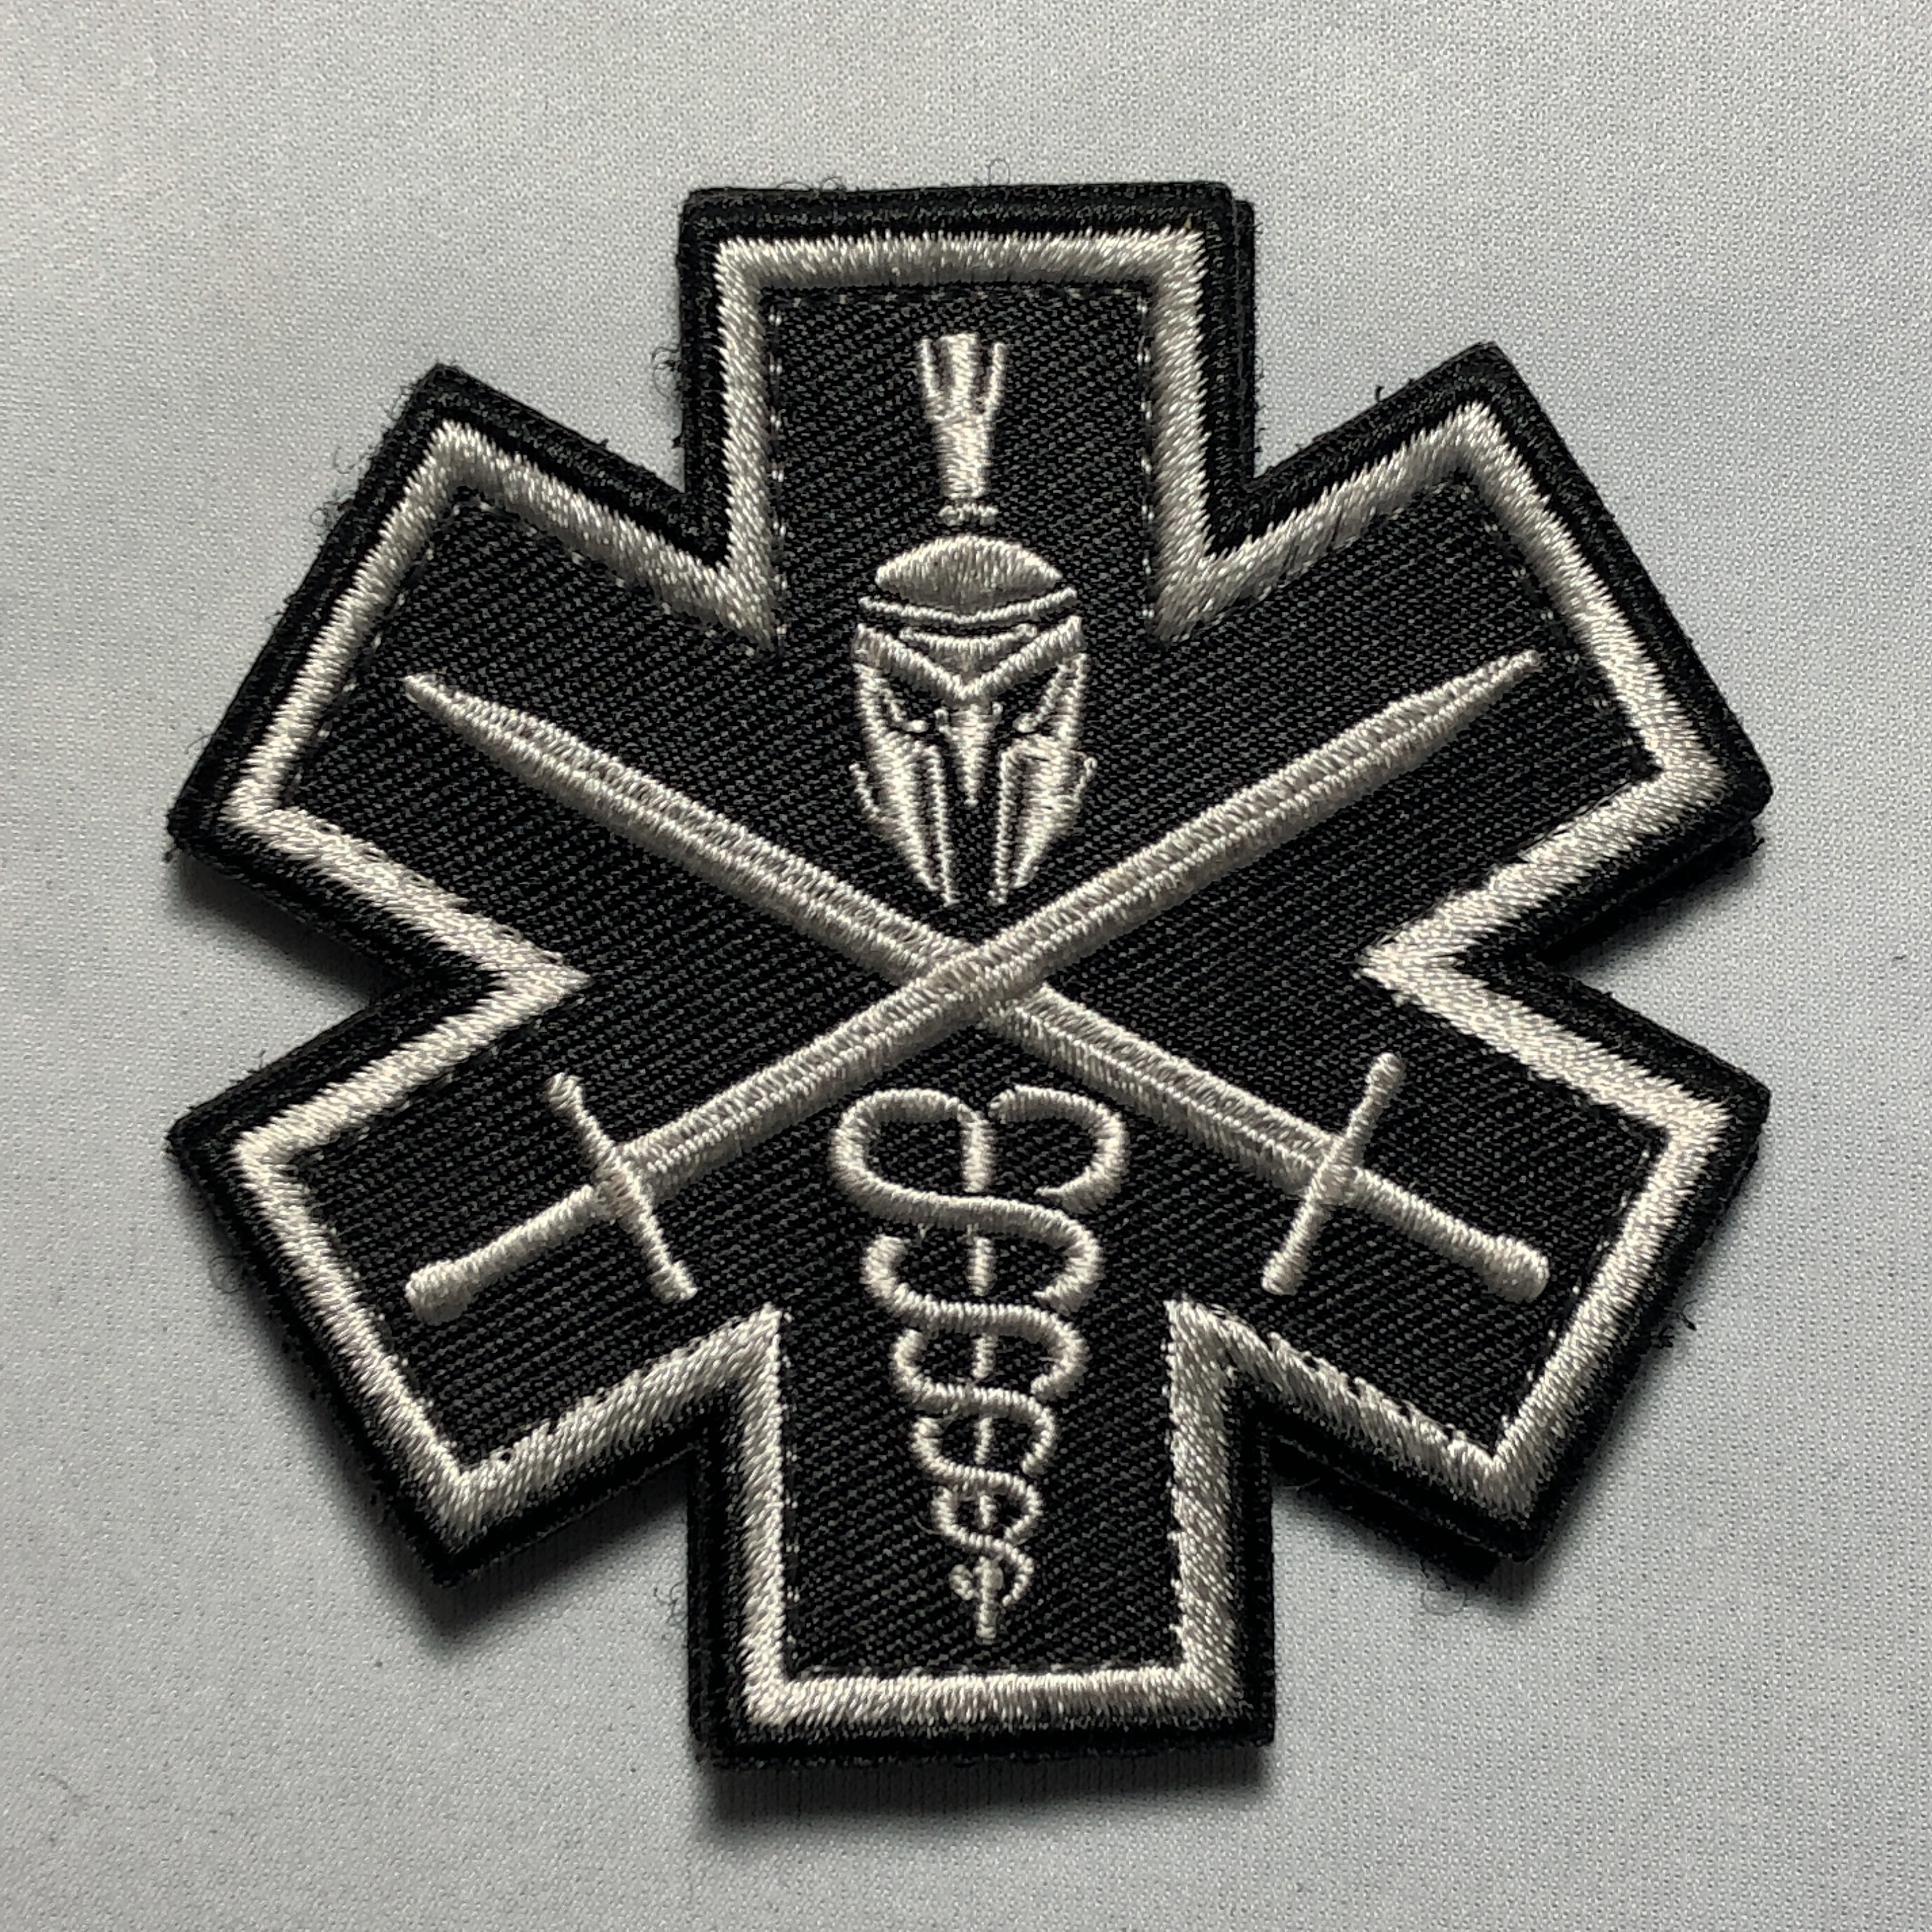 Medic Cross, First Aid, Reflective Tactical Medical Patch, Cross EMS, EMT 